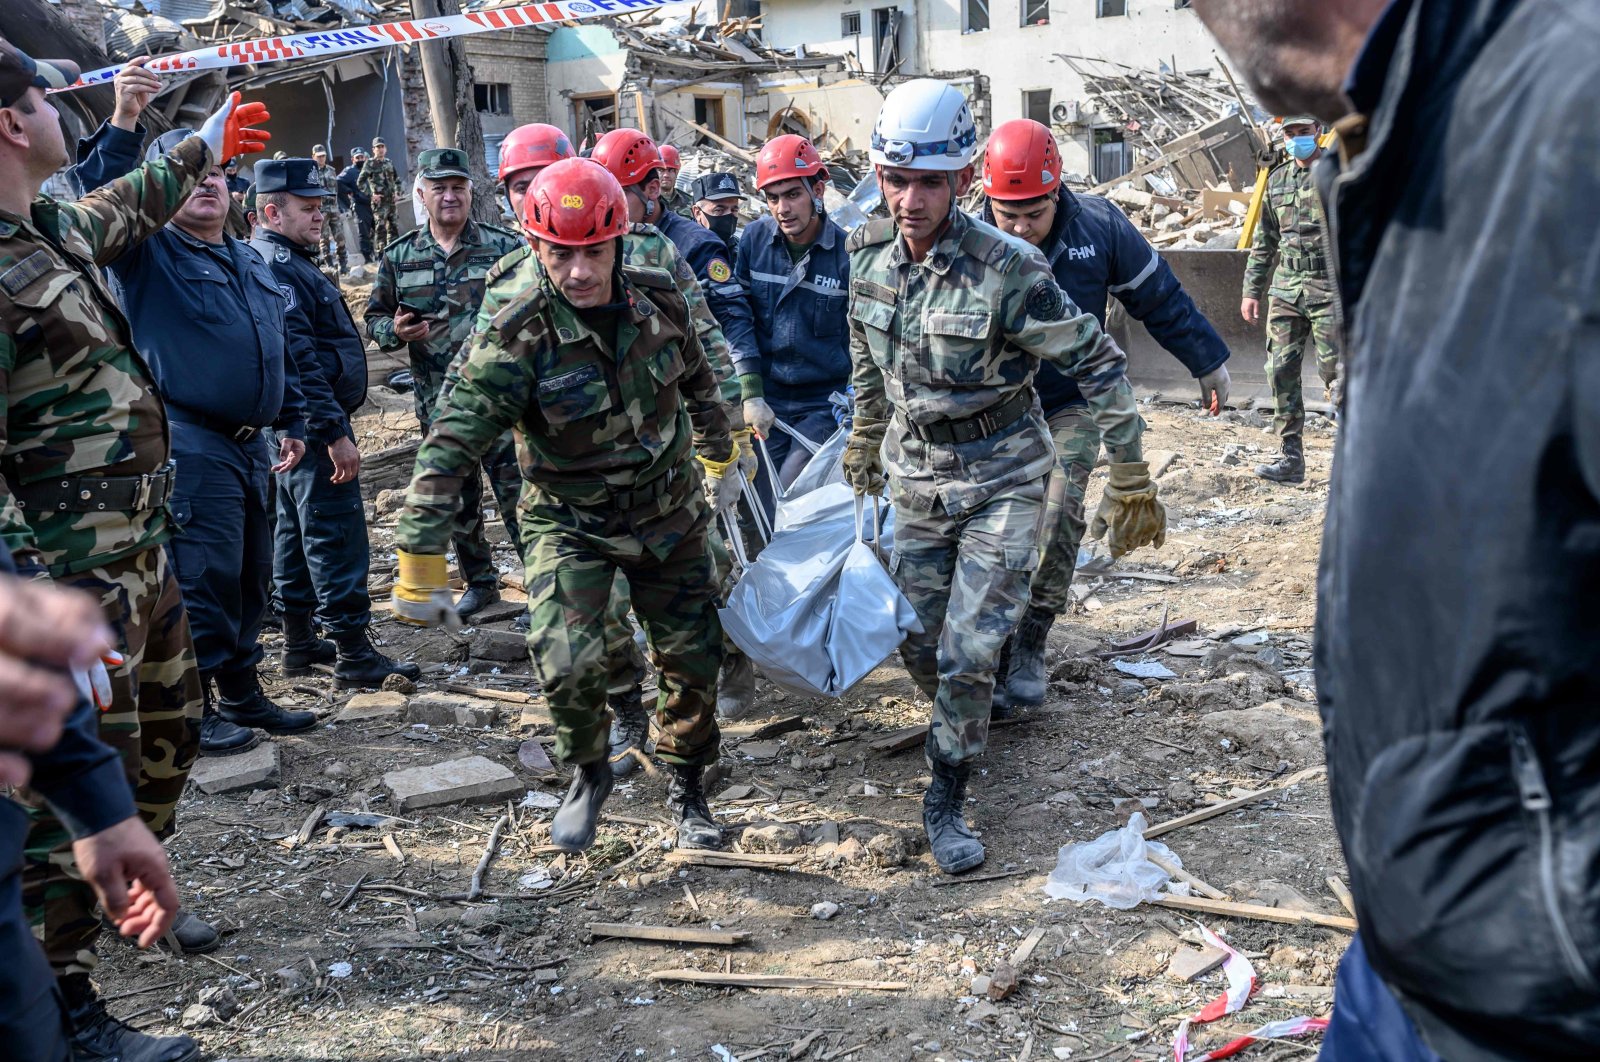 Rescuers carry away the body of an Azerbaijani victim at the blast site hit by an Armenian rocket in the city of Ganja, Azerbaijan, Oct. 11, 2020. (AFP)